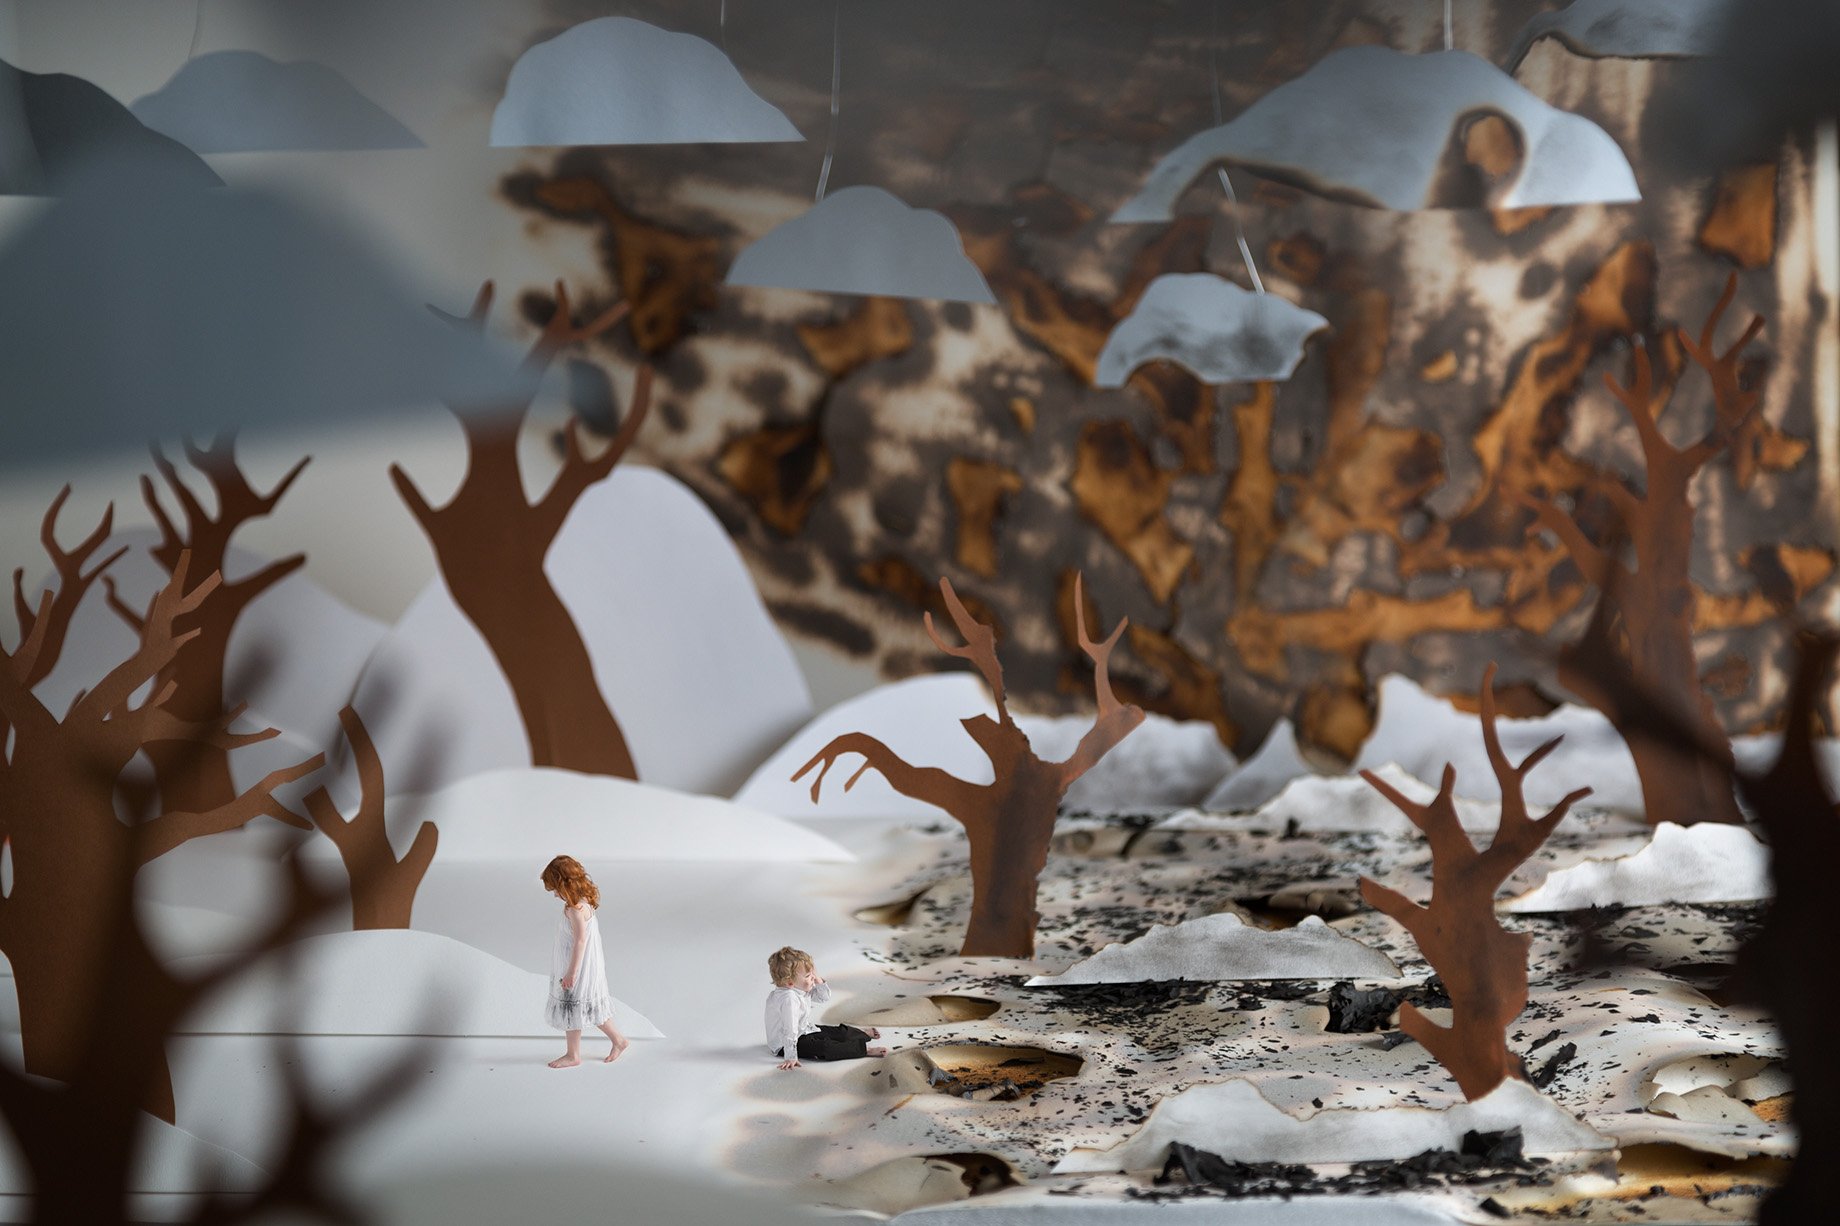 Two children roam a snowy and smoky plain made from construction paper shot by Patrick Heageny for Paper Thin